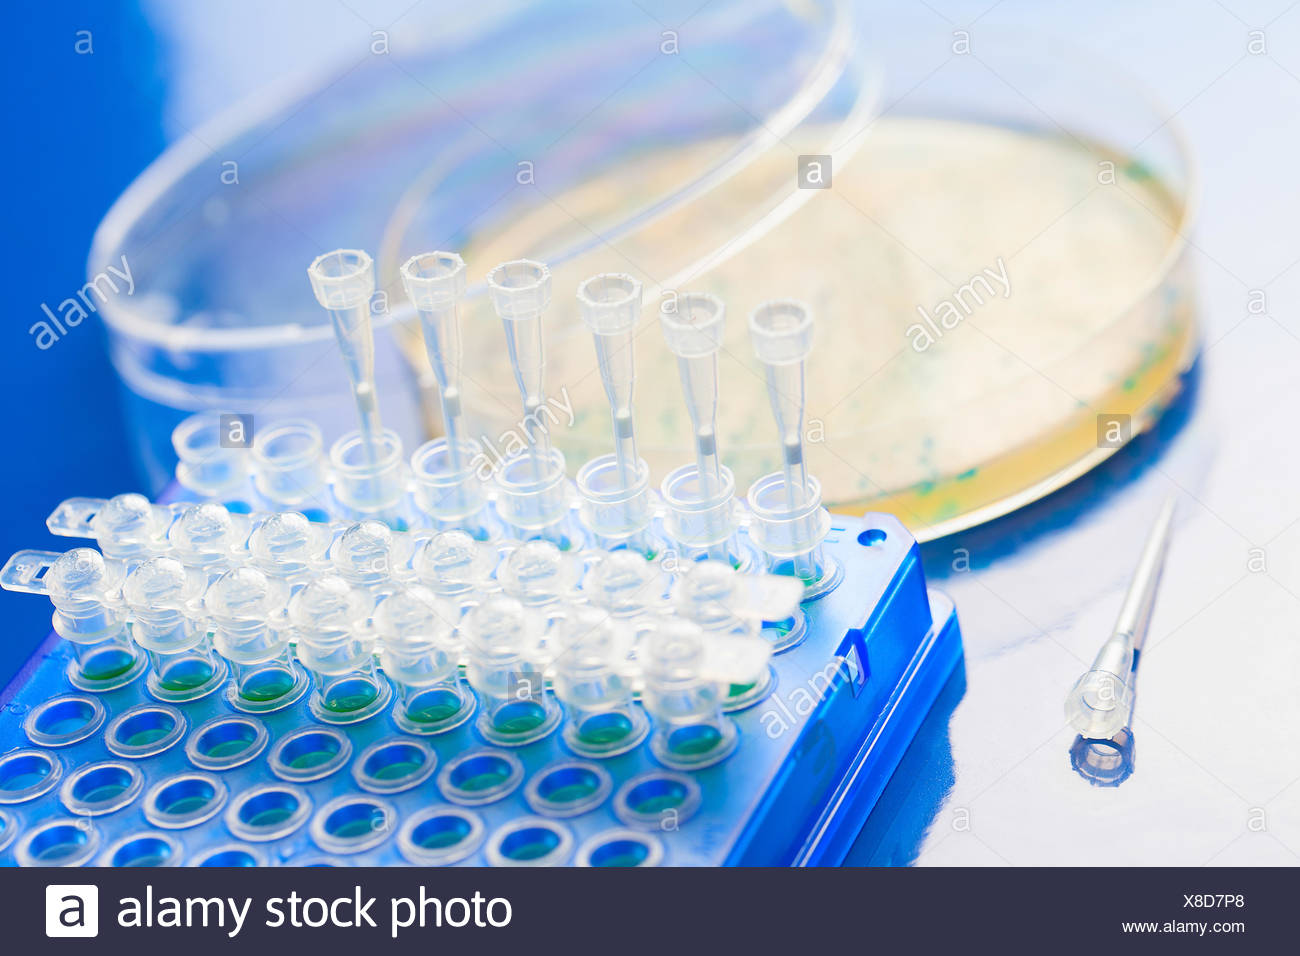 Mutagenesis High Resolution Stock Photography and Images - Alamy